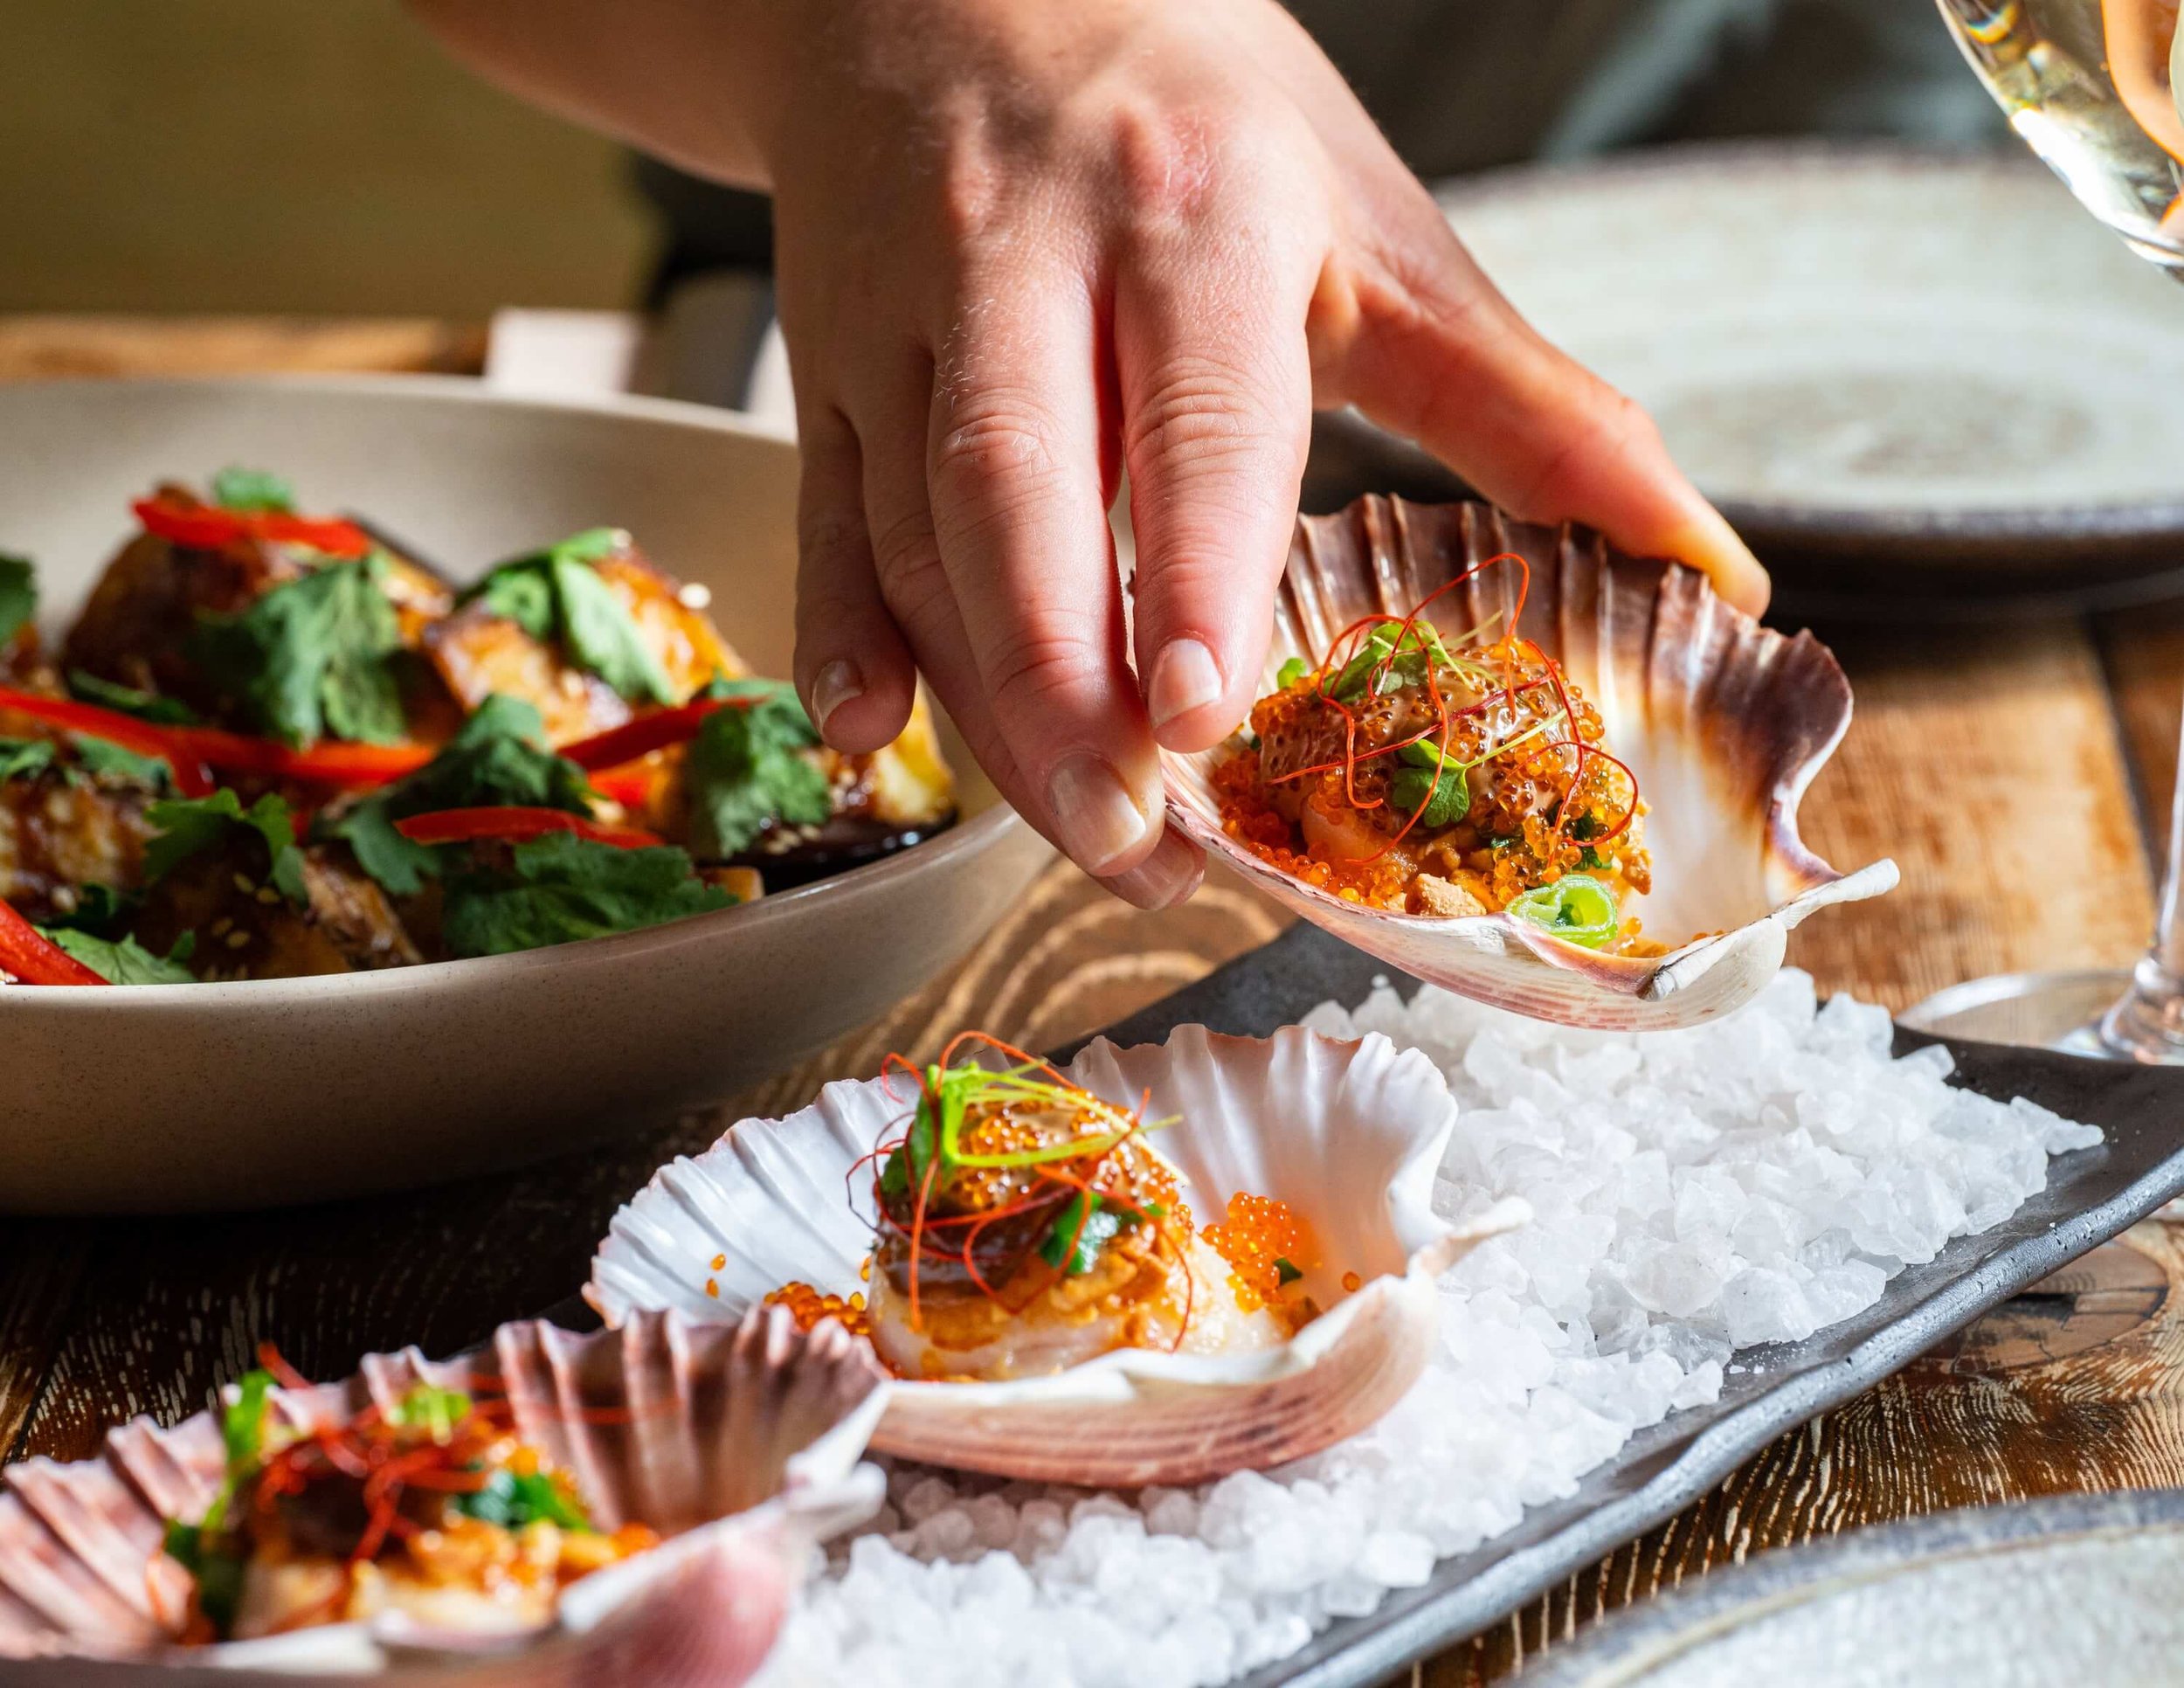  someone picking up a scallop in a shell with chilli and fresh herbs 